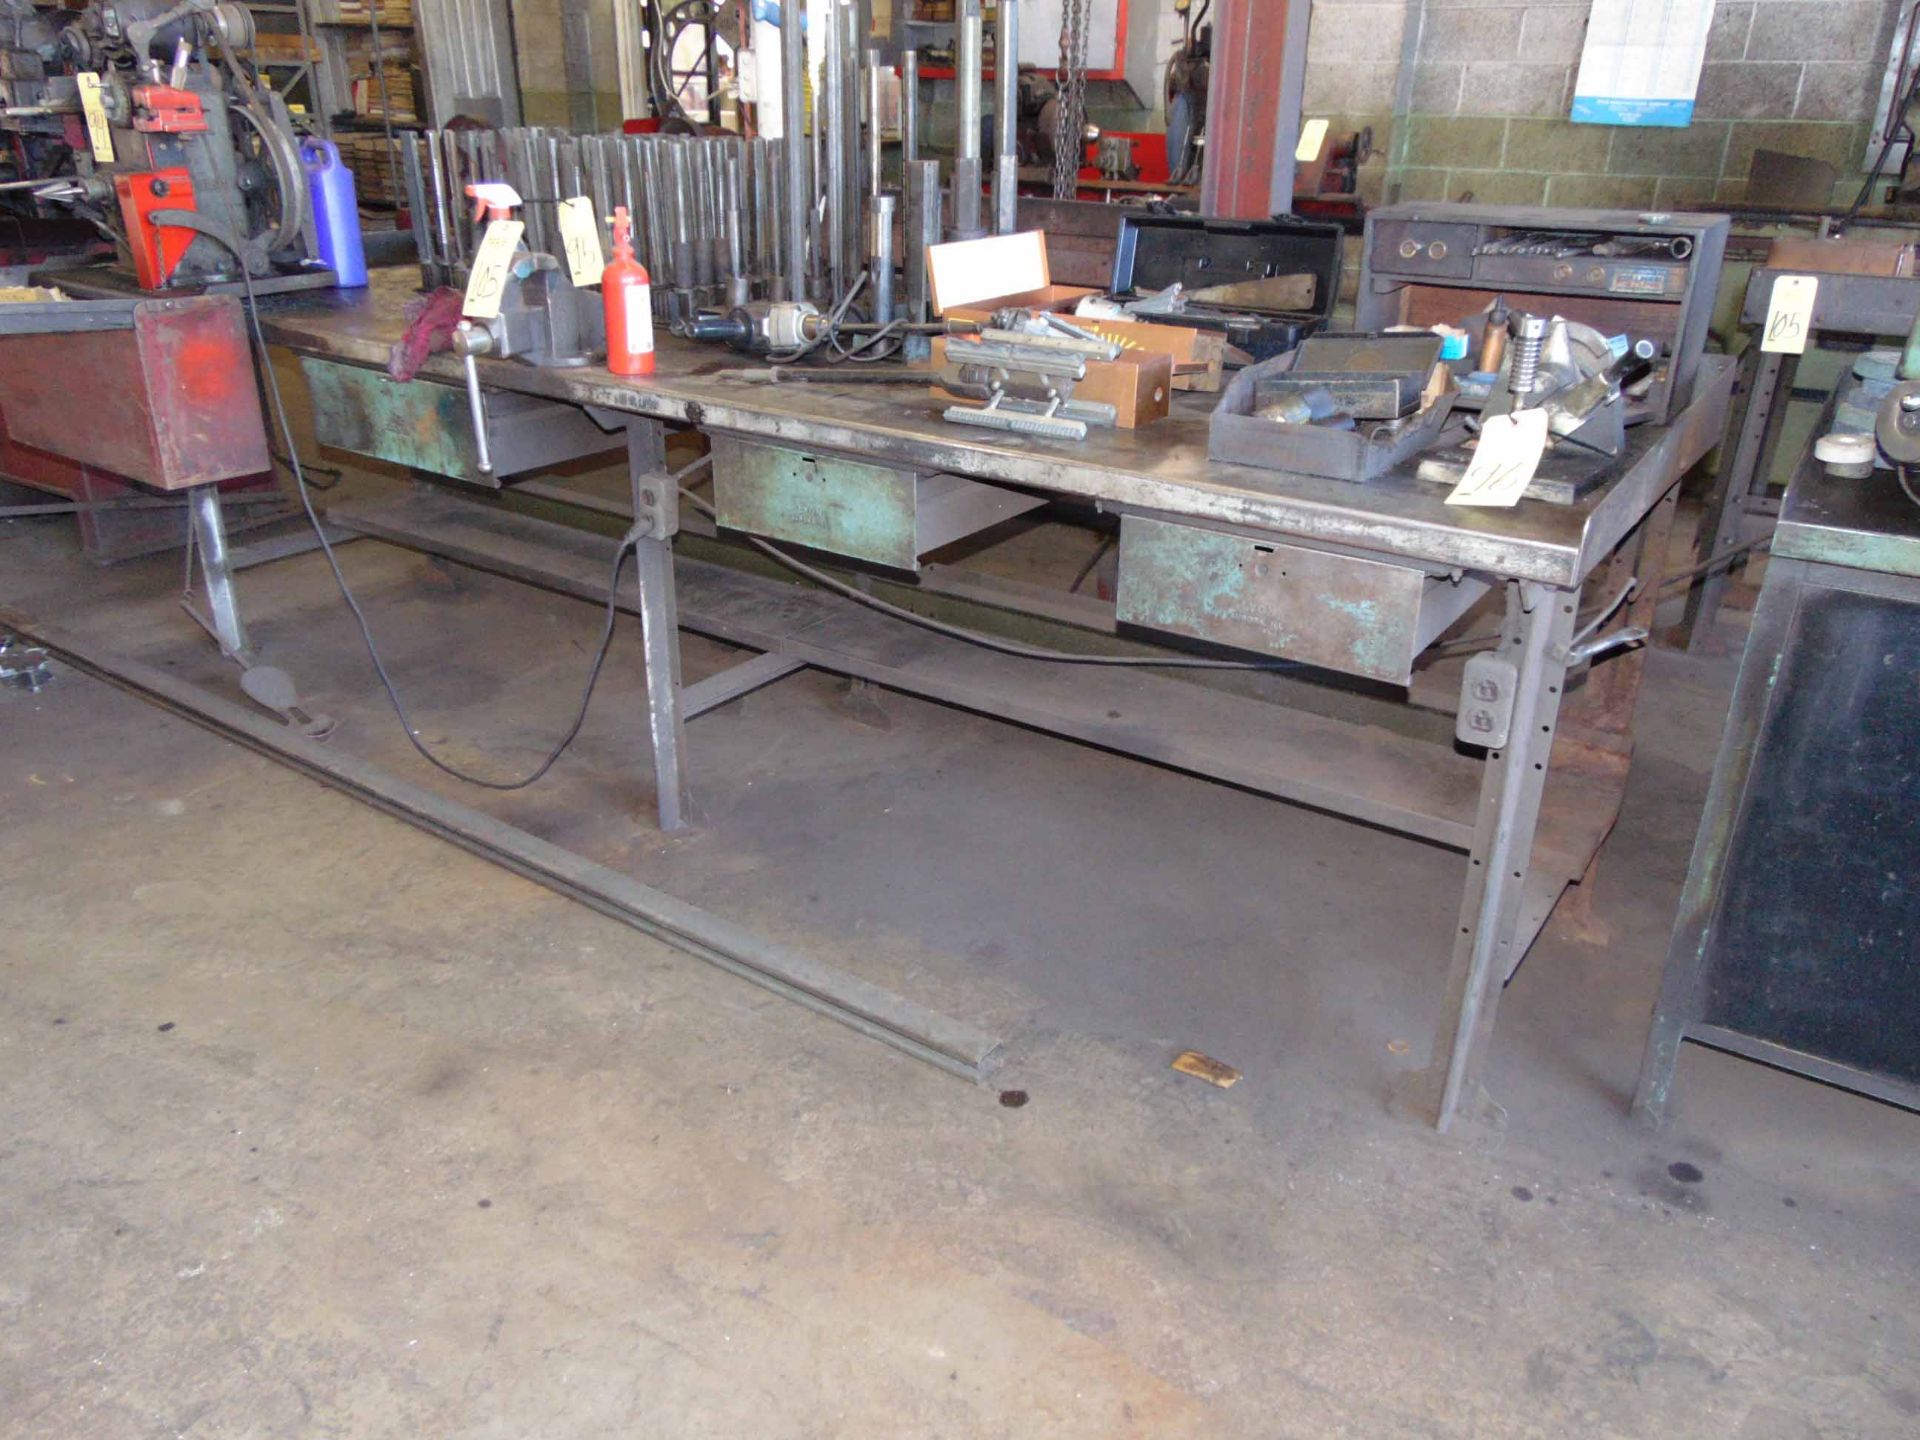 LOT OF STEEL WORK BENCHES (4), (cannot be removed until empty) - Image 2 of 4